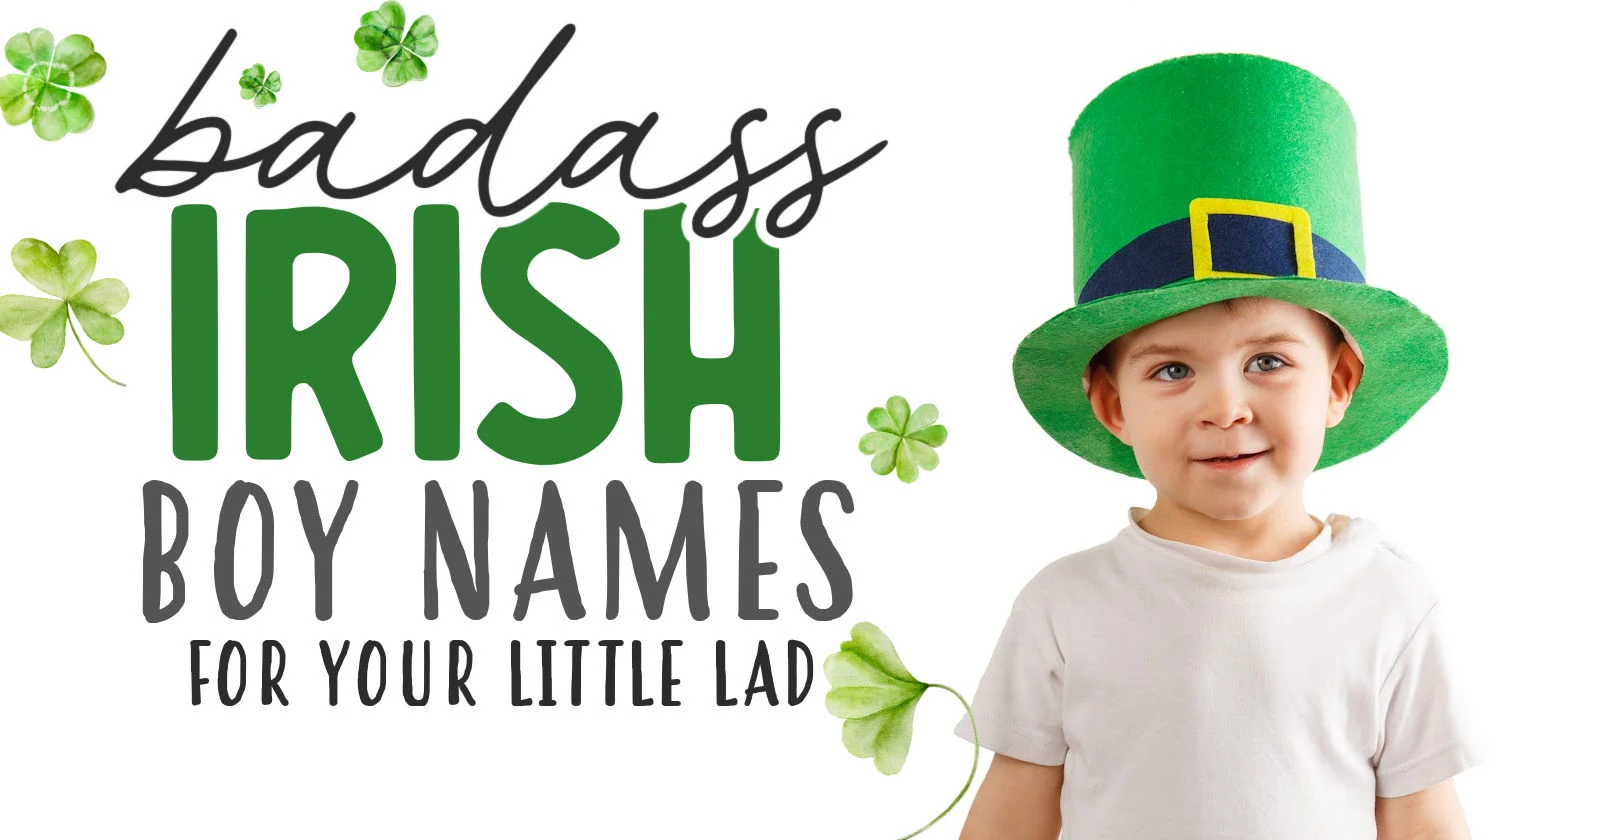 little red haired boy wearing green Irish hat and title badass irish boy names for your little lad. shamrocks scattered around.